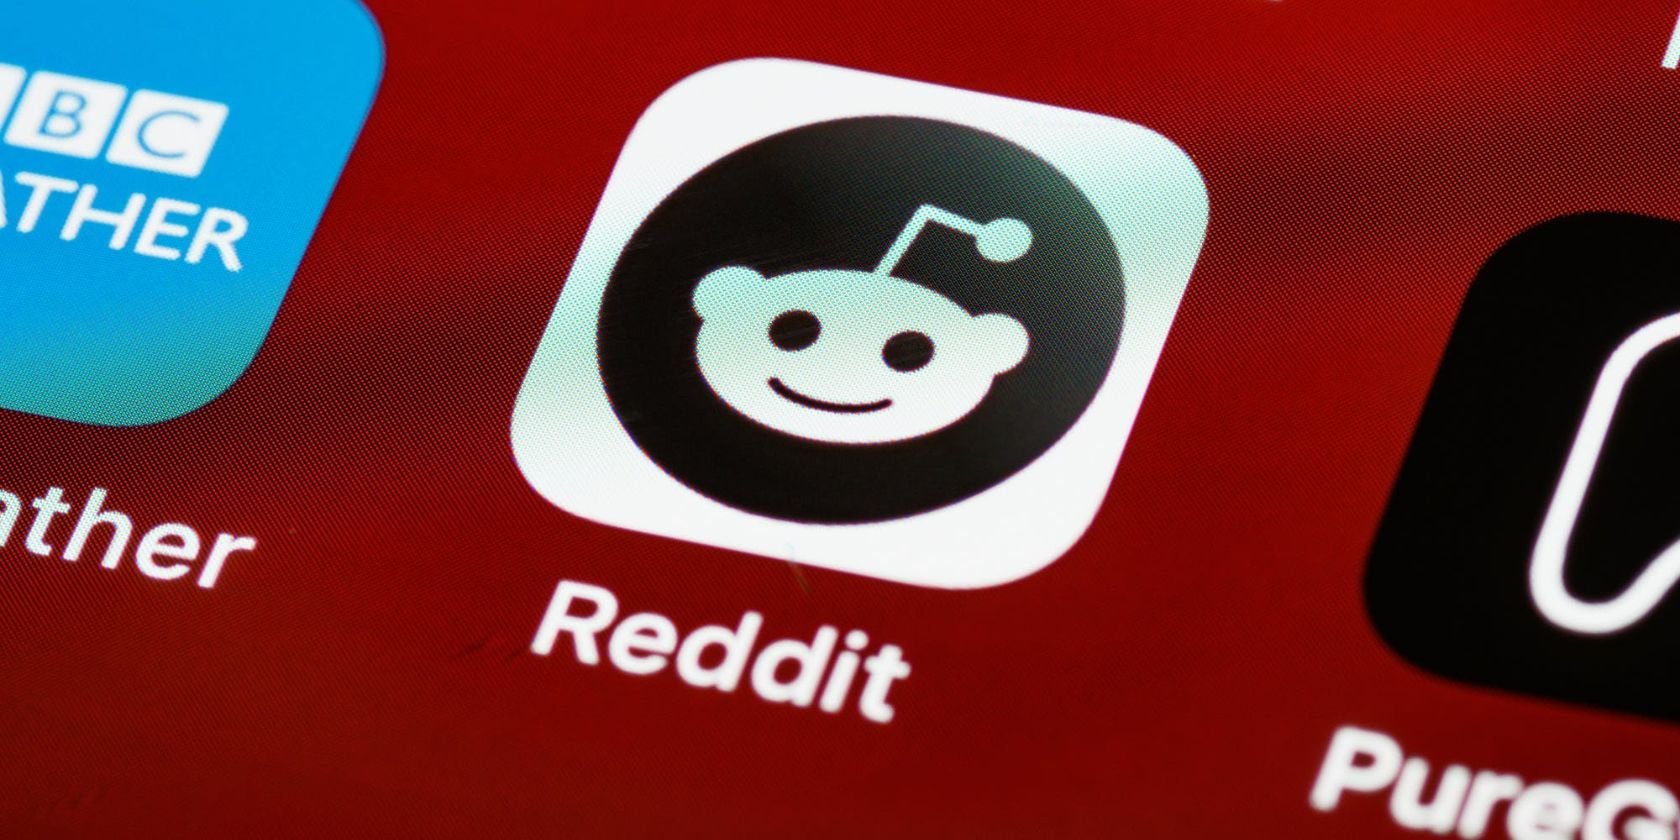 15 Reddit Acronyms Everyone Should Know